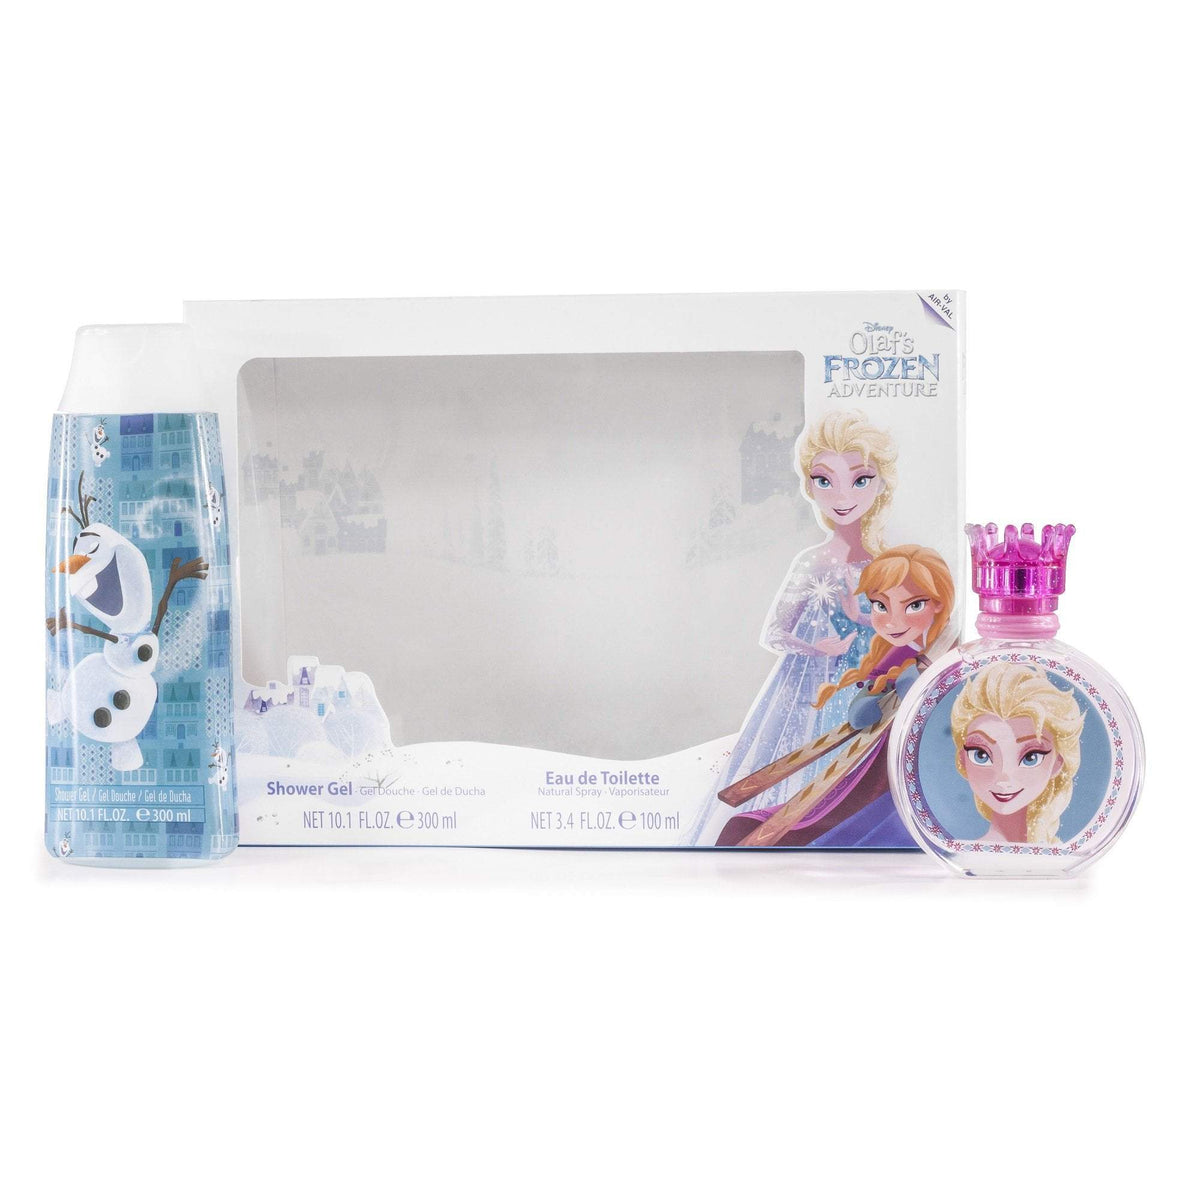 Olaf's Frozen Adventure Gift Set for Girls by Disney